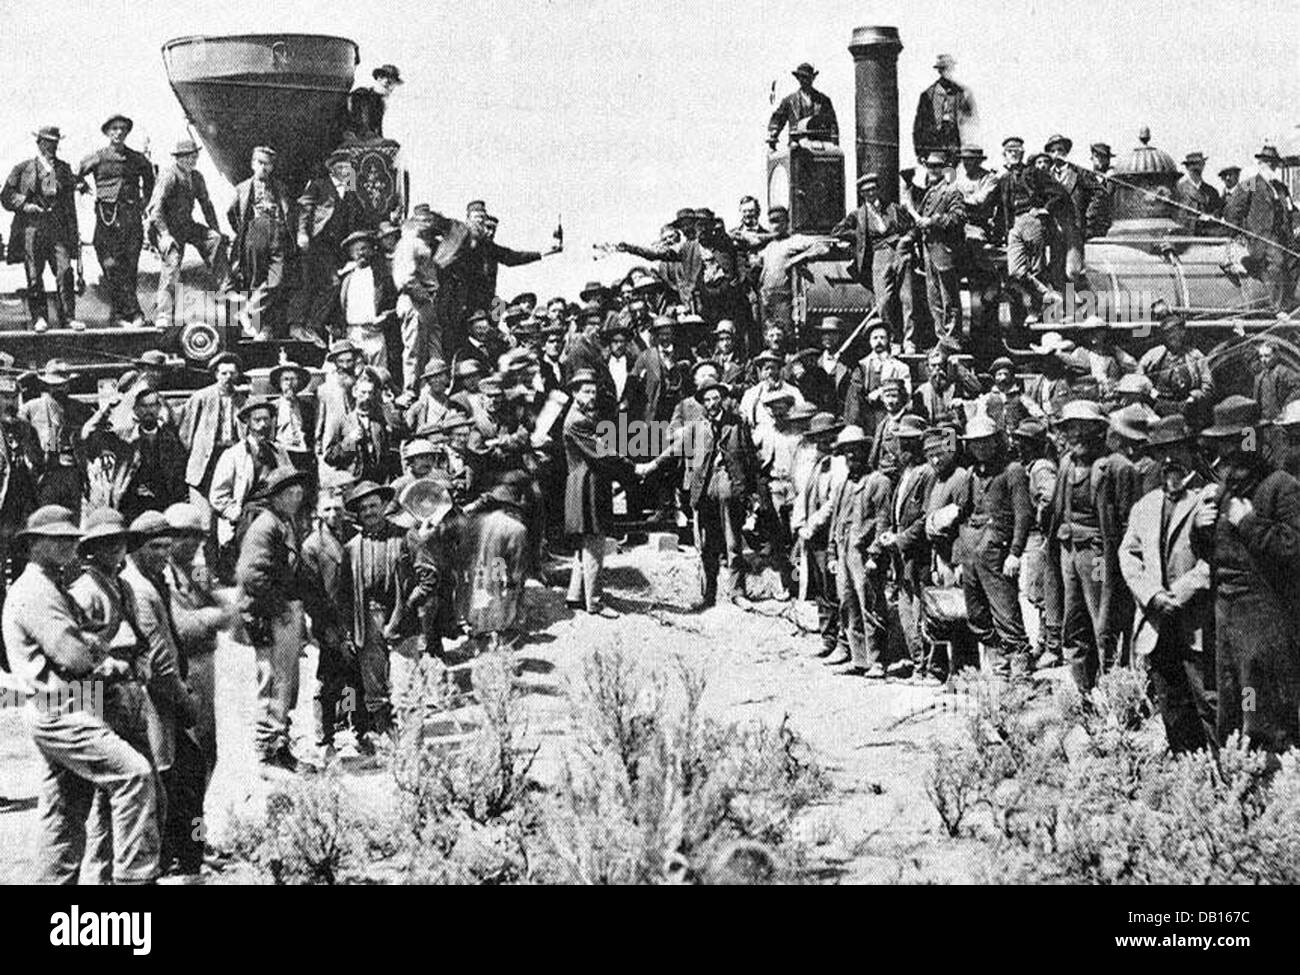 GOLDEN SPIKE  Joining the Central Pacific and Union Pacific railroad lines at Promontory Summit, Utah, 10 May 1869 Stock Photo